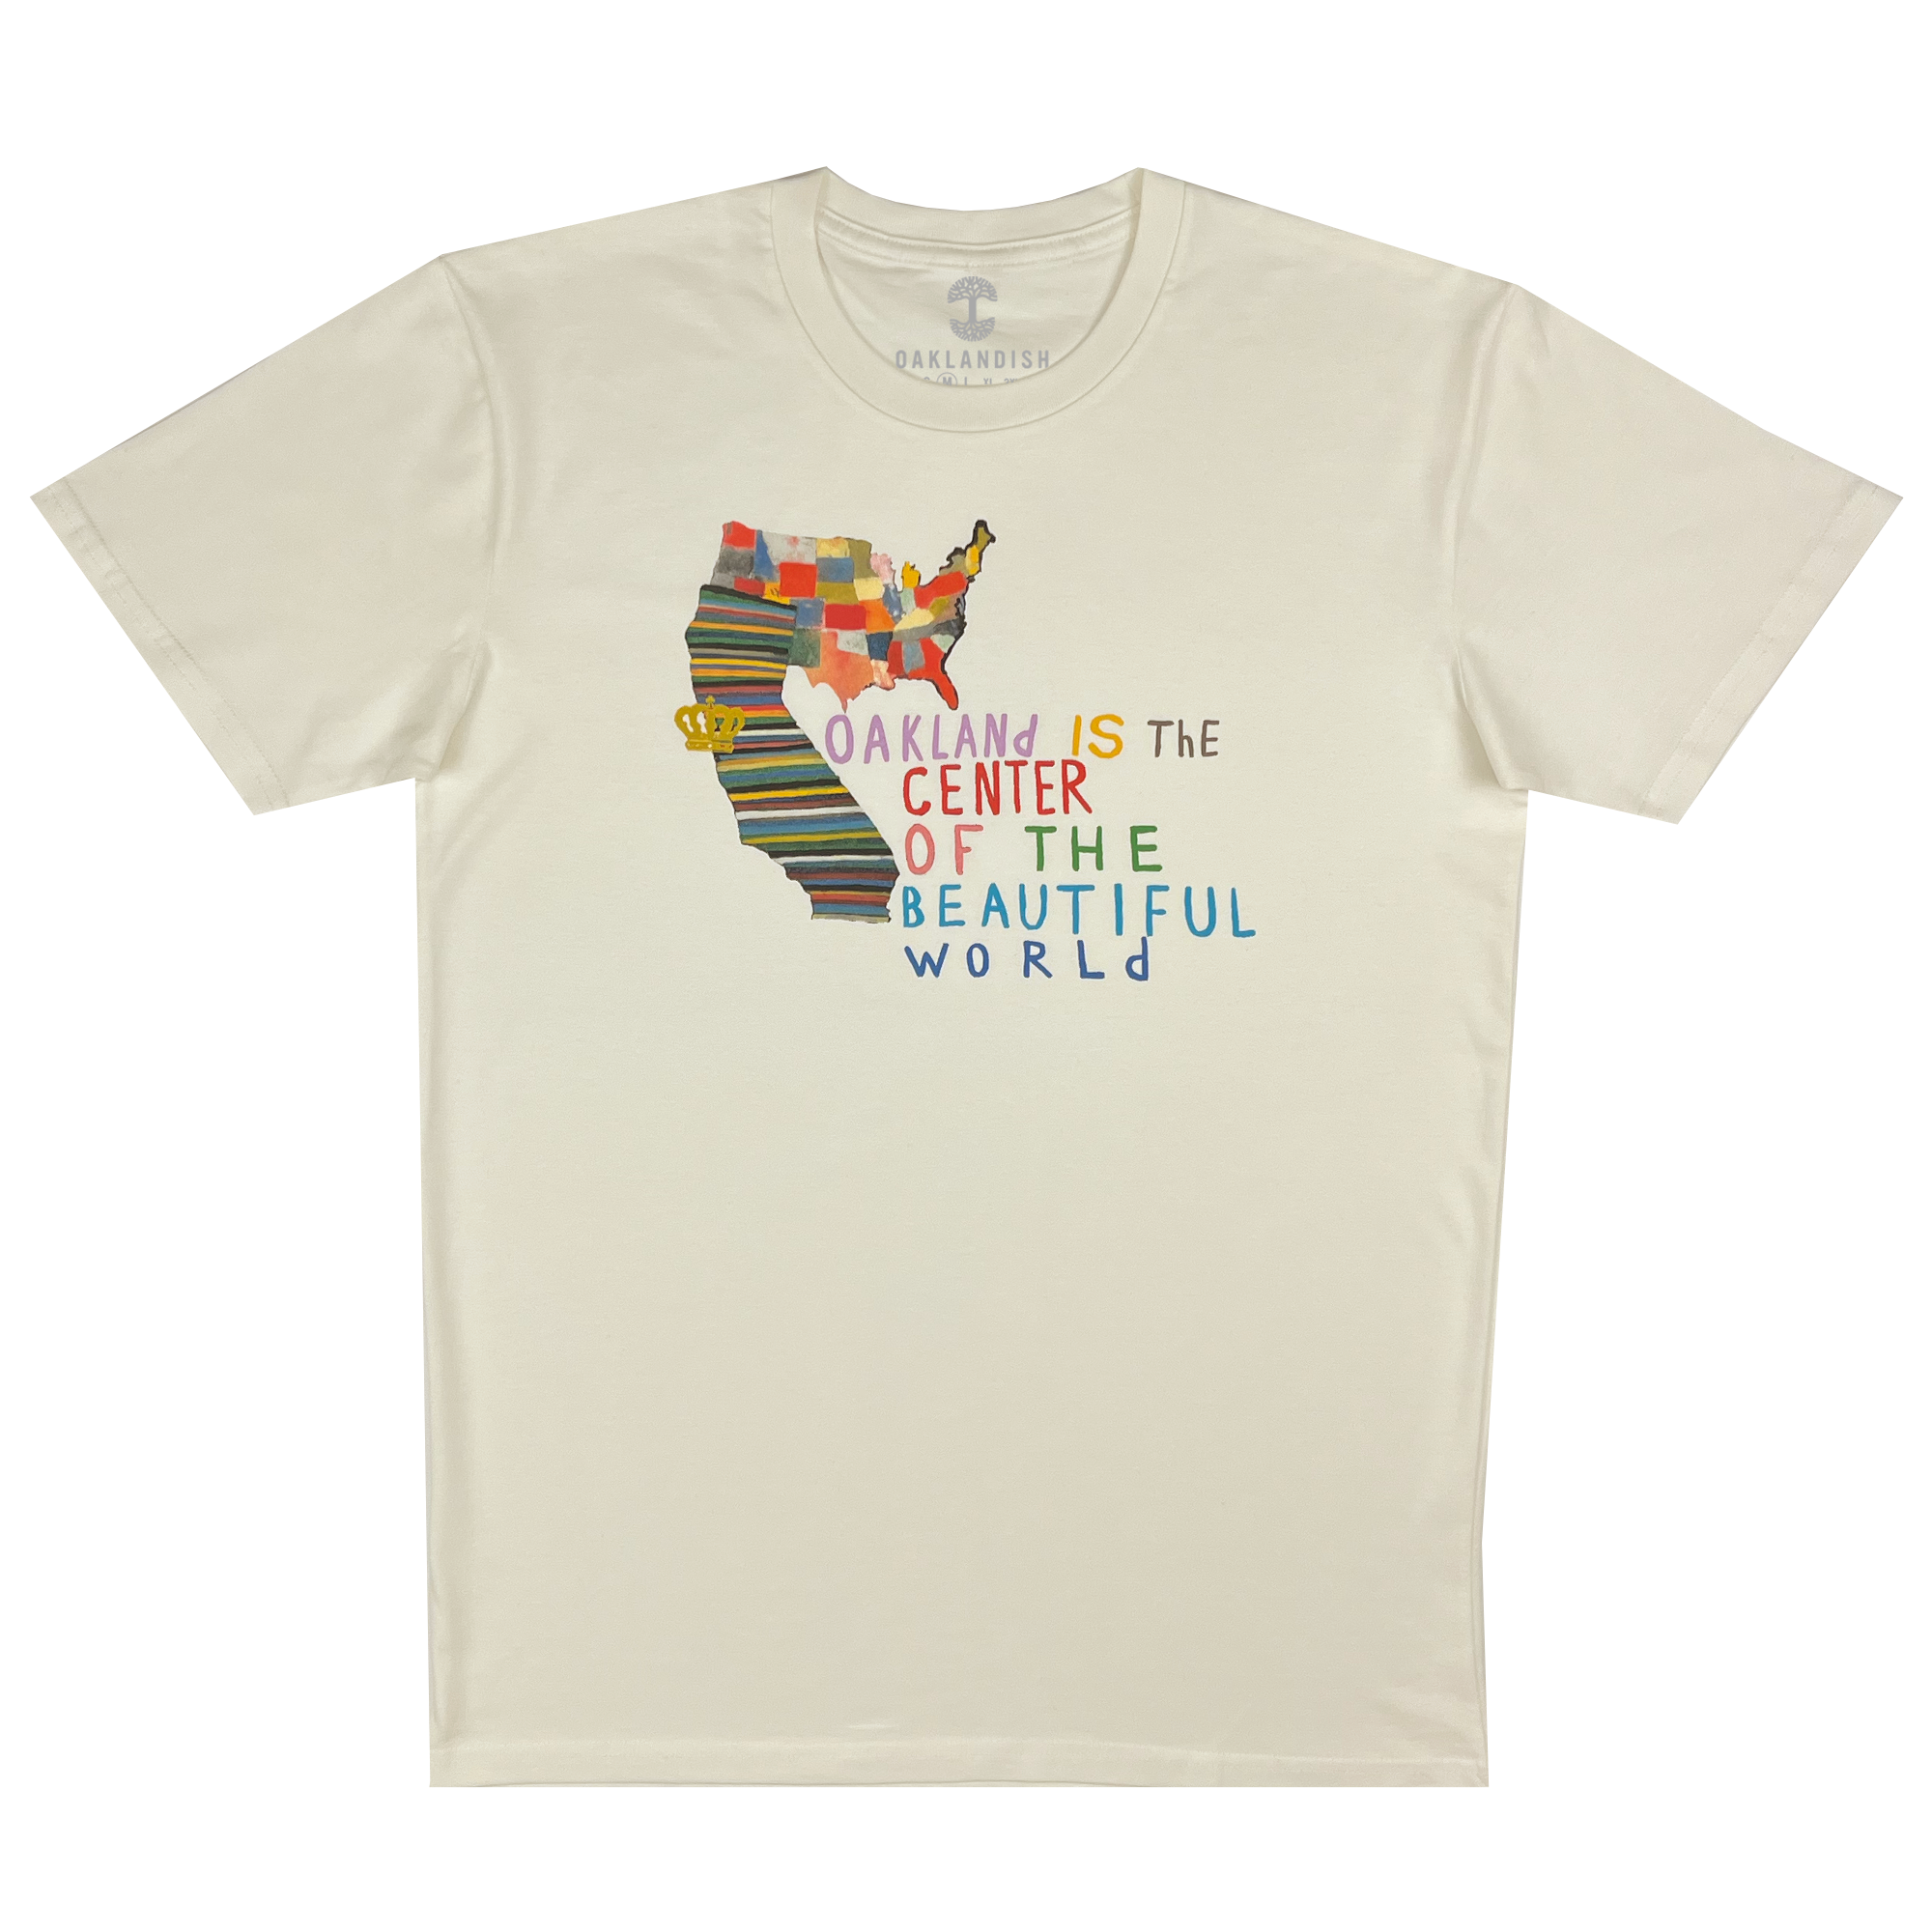 Oakland Is the Center of World mural art by contemporary artist Squeak Carnwath on a natural cotton t-shirt.